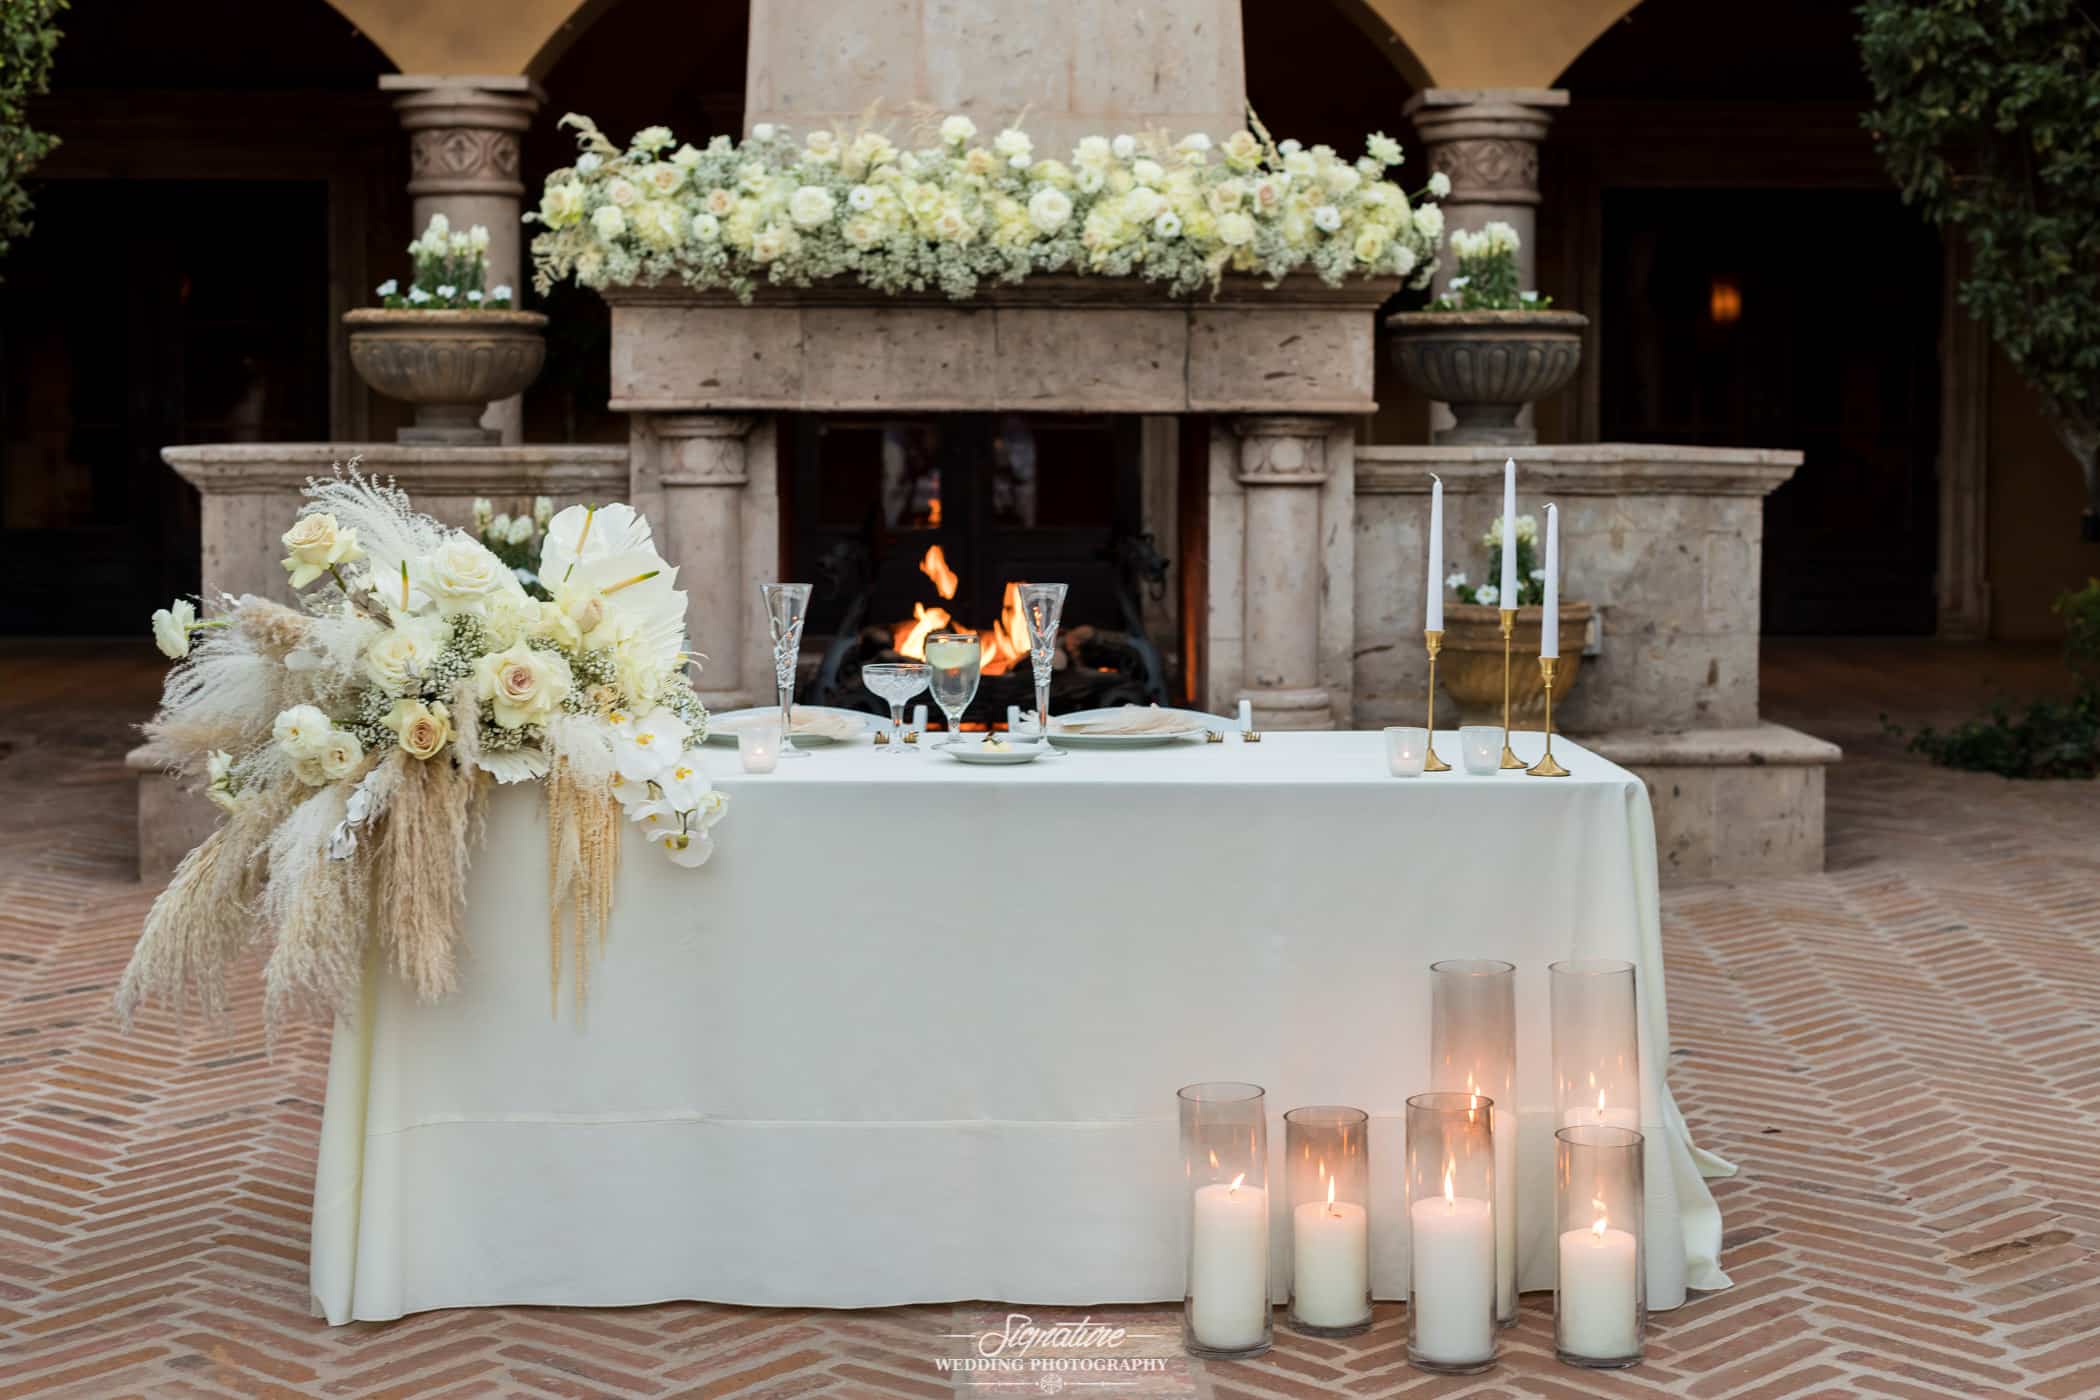 Sweetheart table in front of fireplace